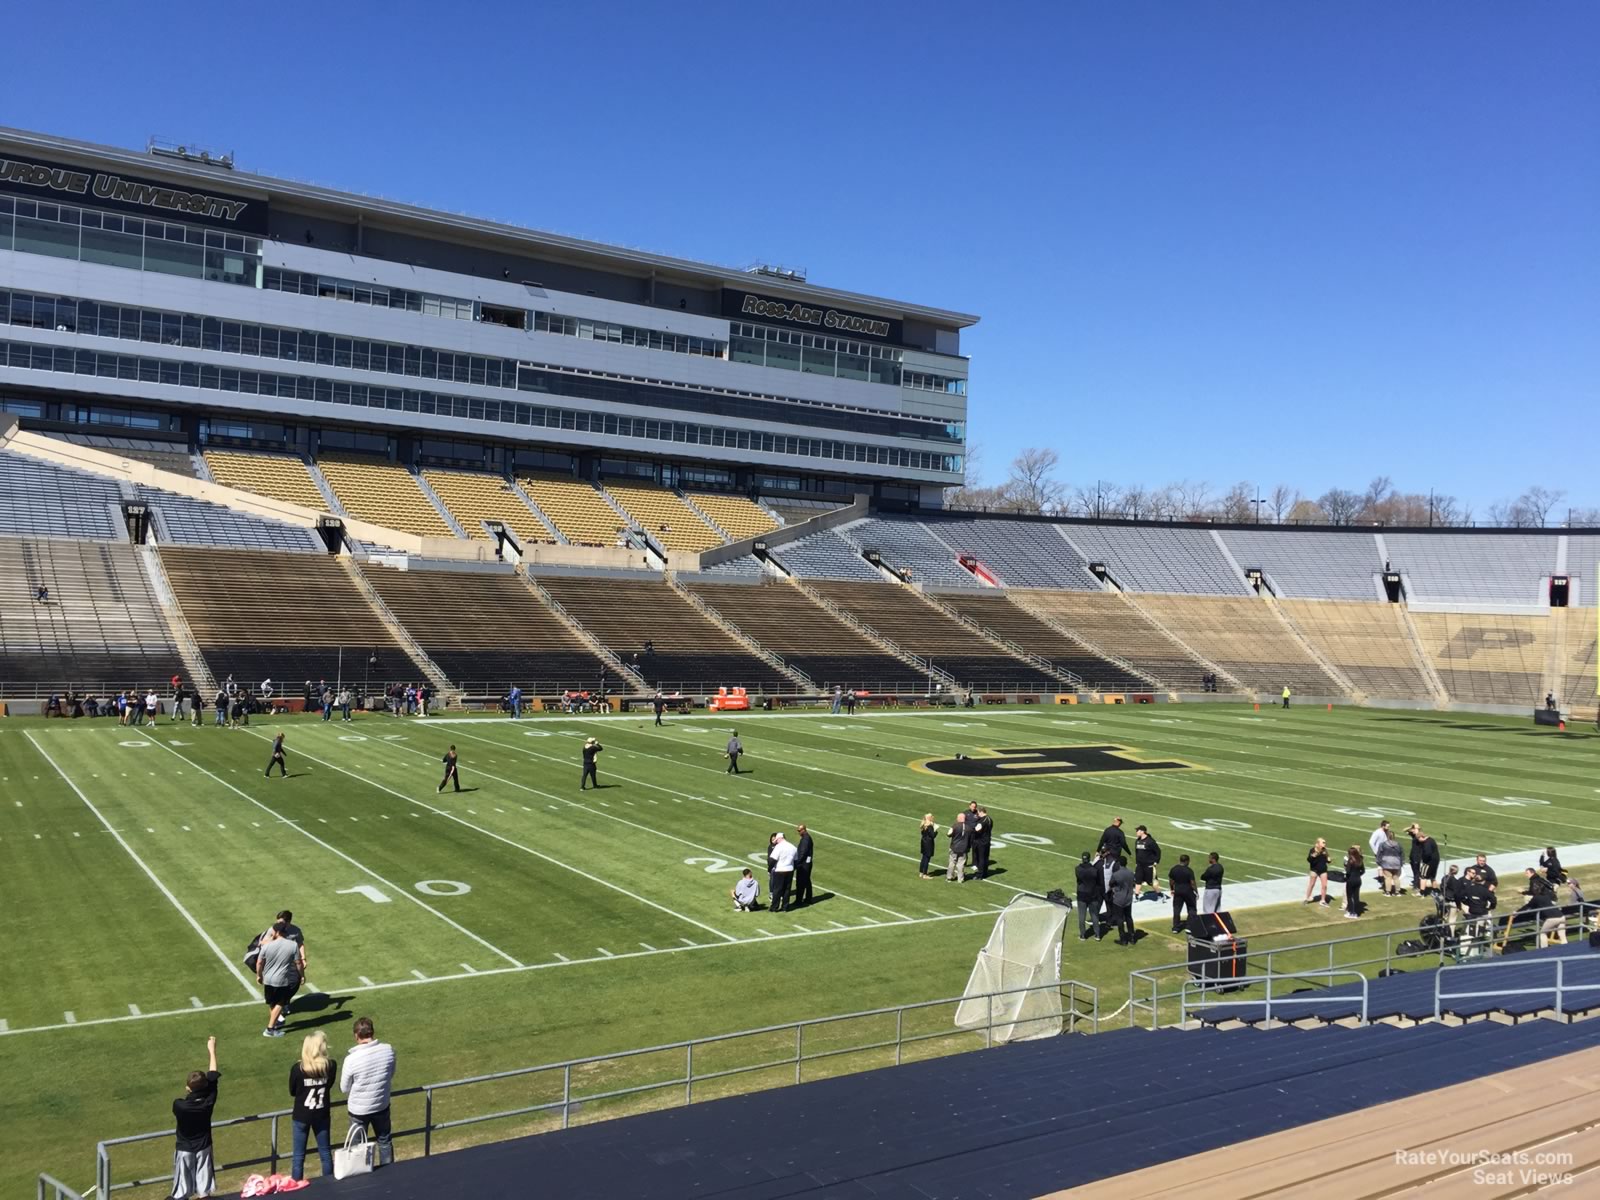 section 102, row 24 seat view  - ross-ade stadium